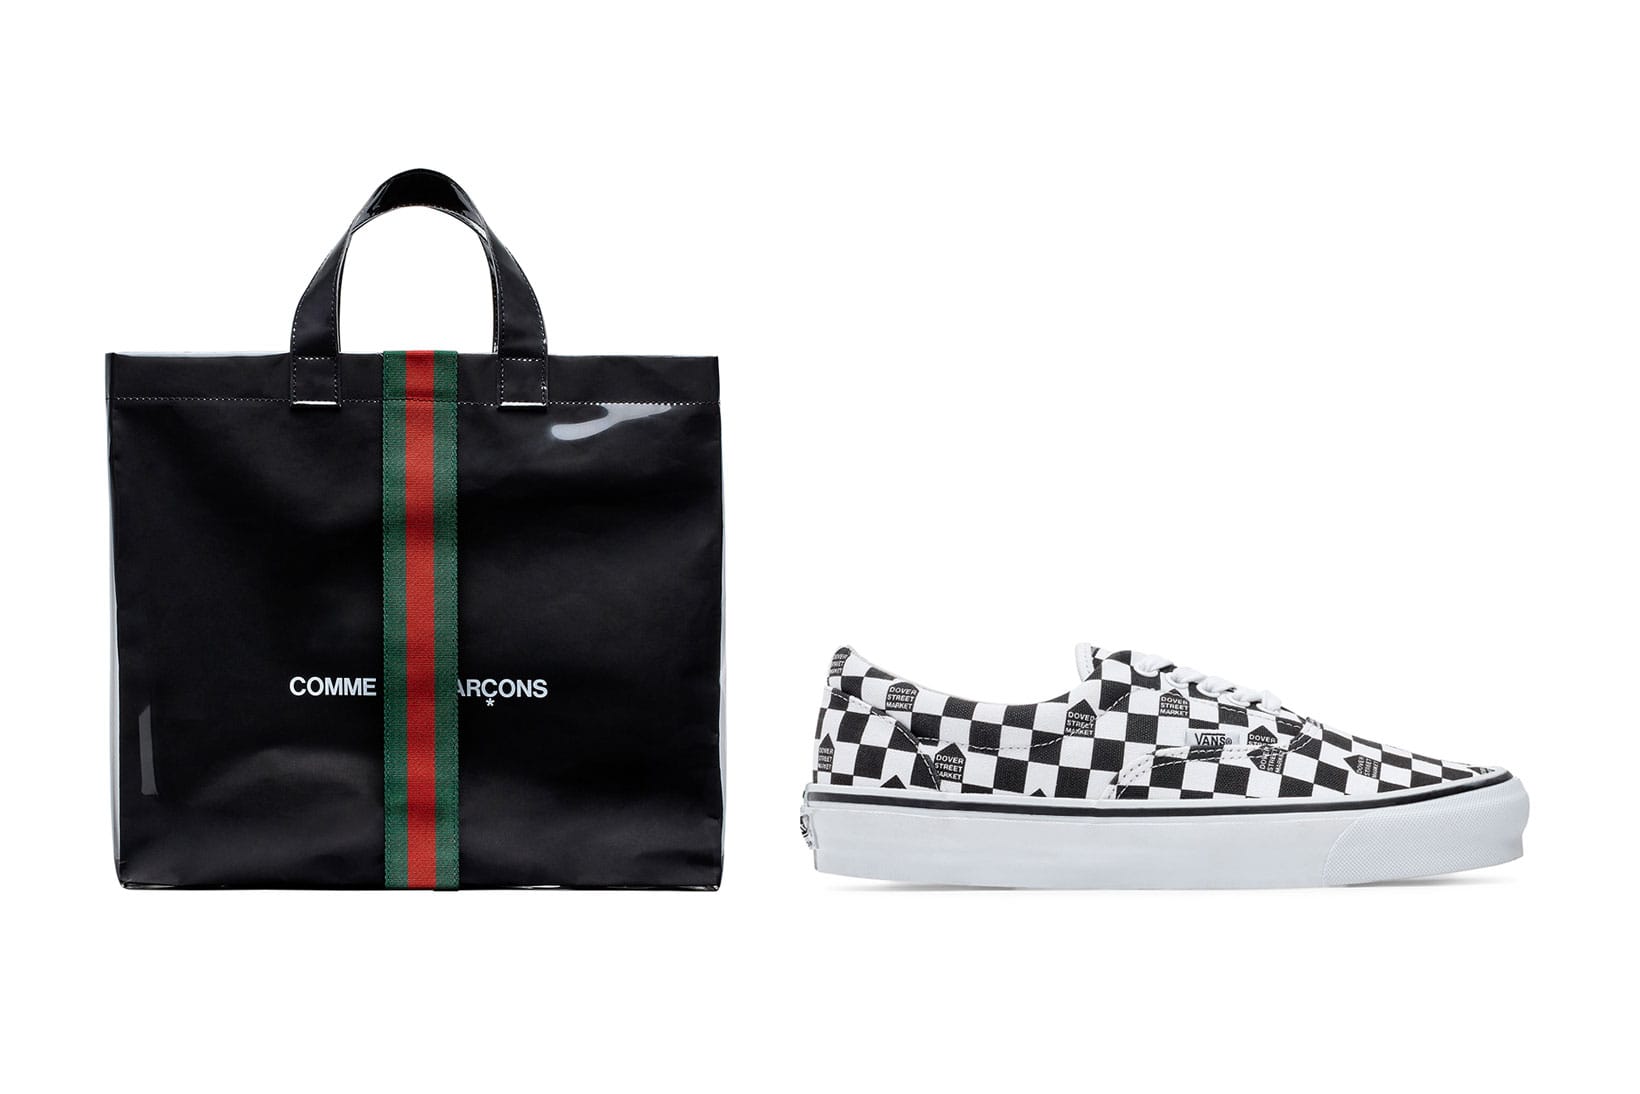 gucci trainers black friday